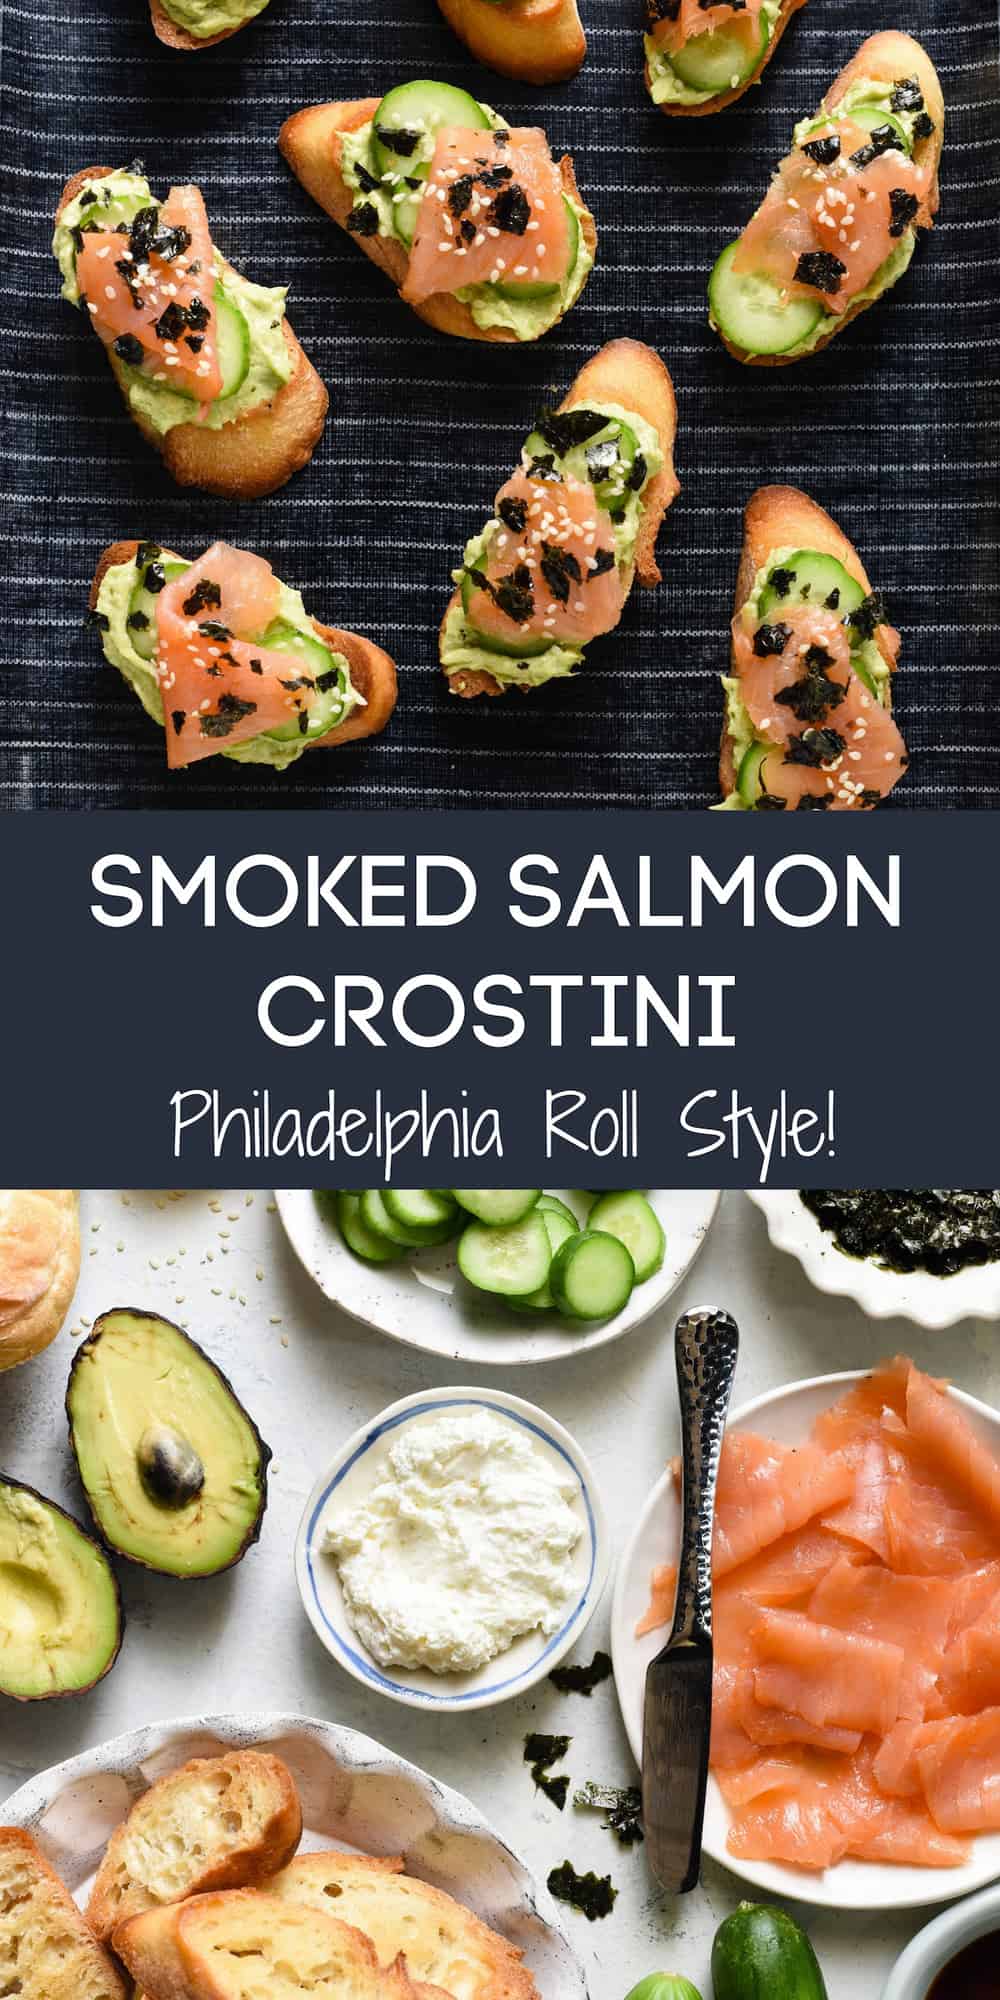 Collage of two images - finished smoked salmon crostini, and ingredients. Overlay: SMOKED SALMON CROSTINI Philadelphia Roll Style!